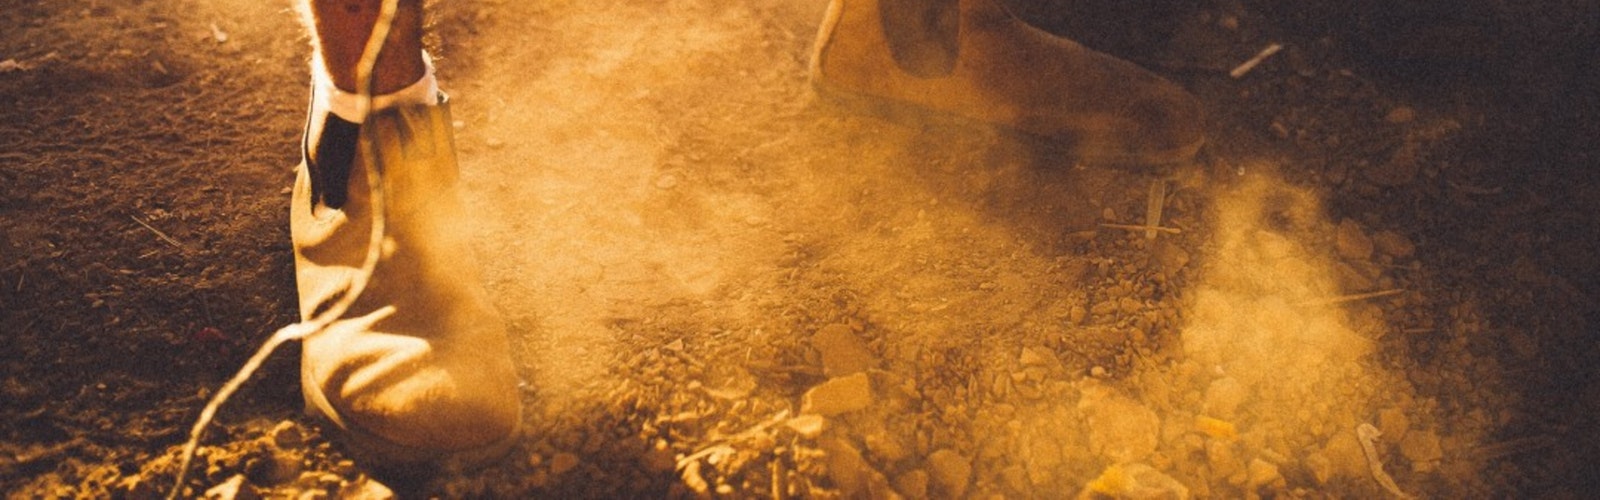 7 Facts Your Employees Need To Know About Silica Dust